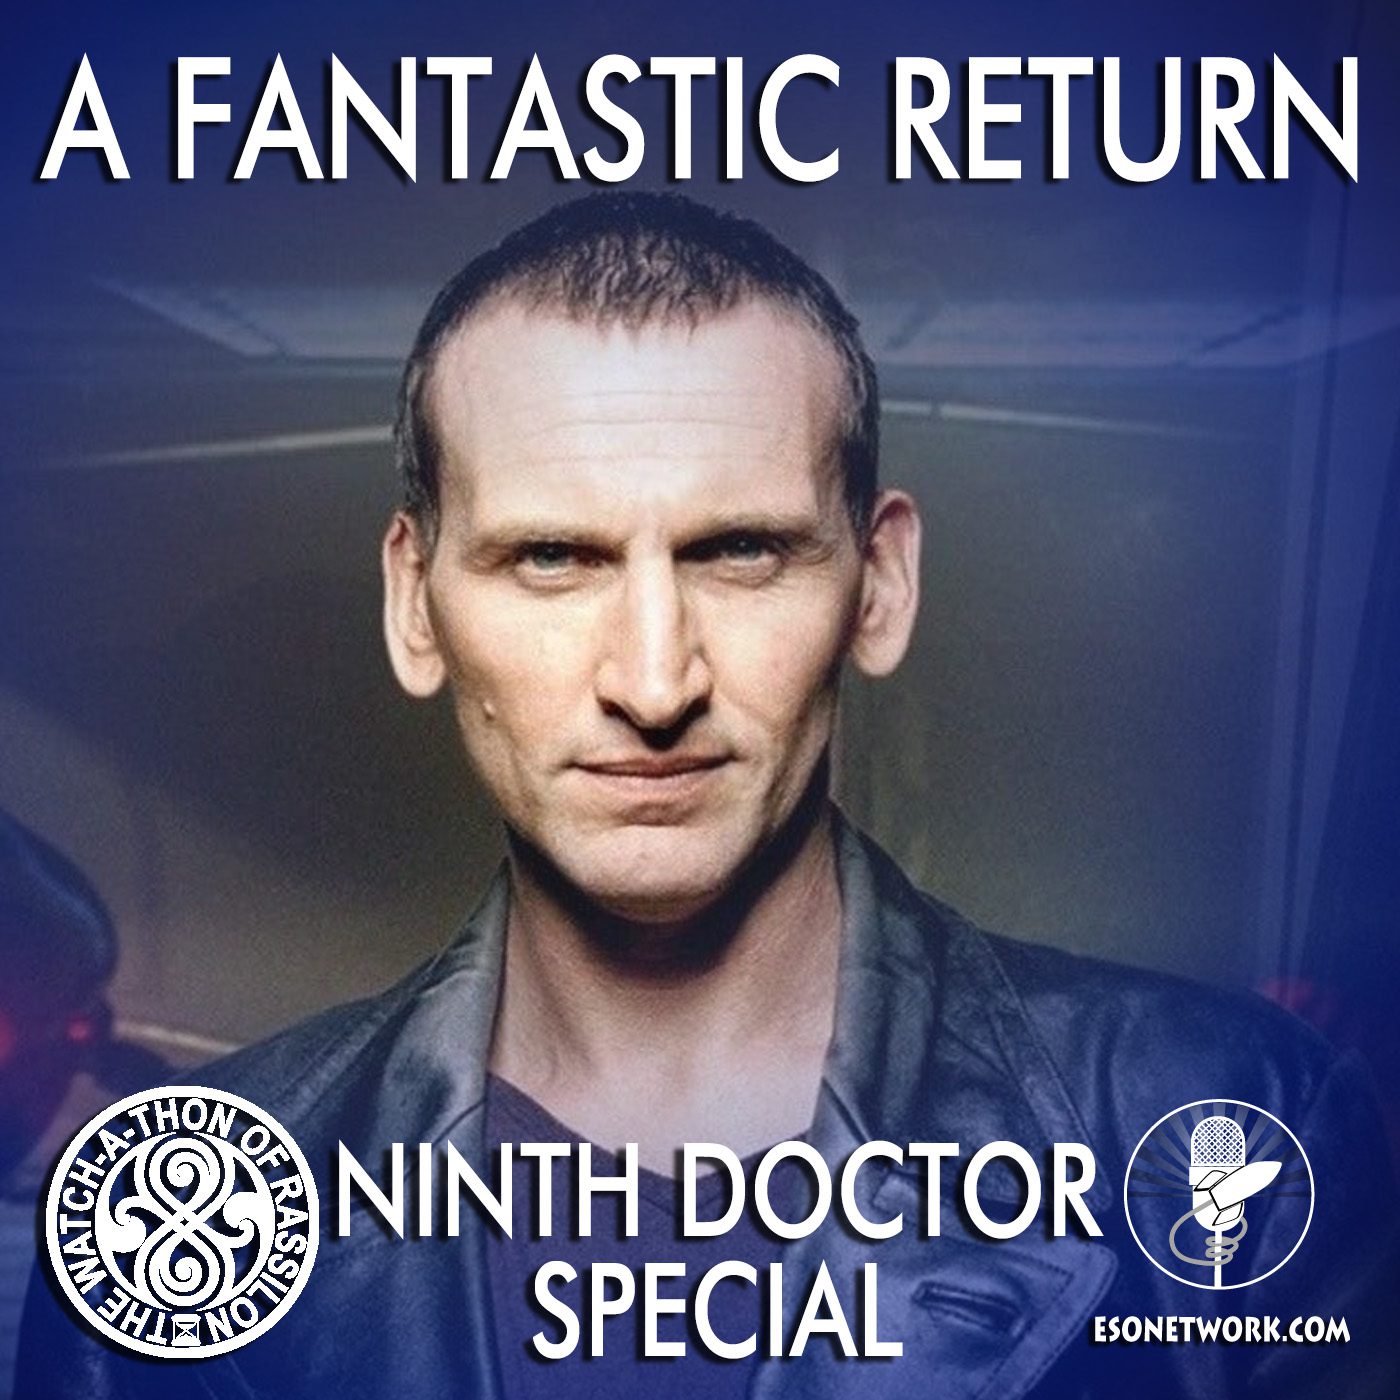 The Watch-A-Thon of Rassilon: Ninth Doctor Special: A Fantastic Return